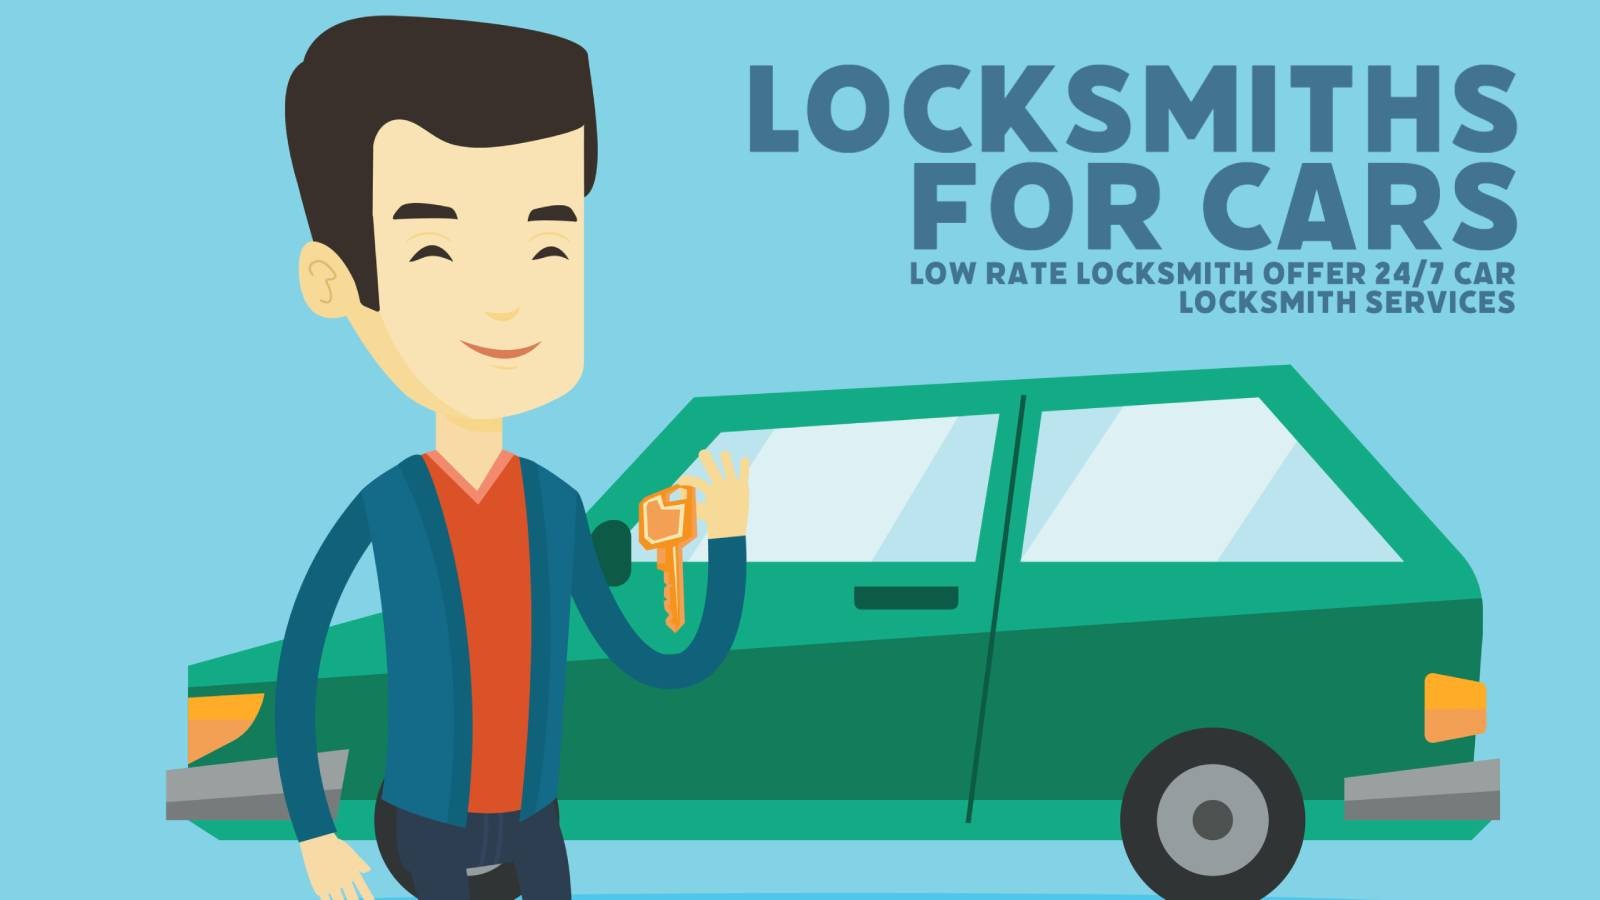 Airport Locksmiths For Cars | The Best Locksmith For Cars